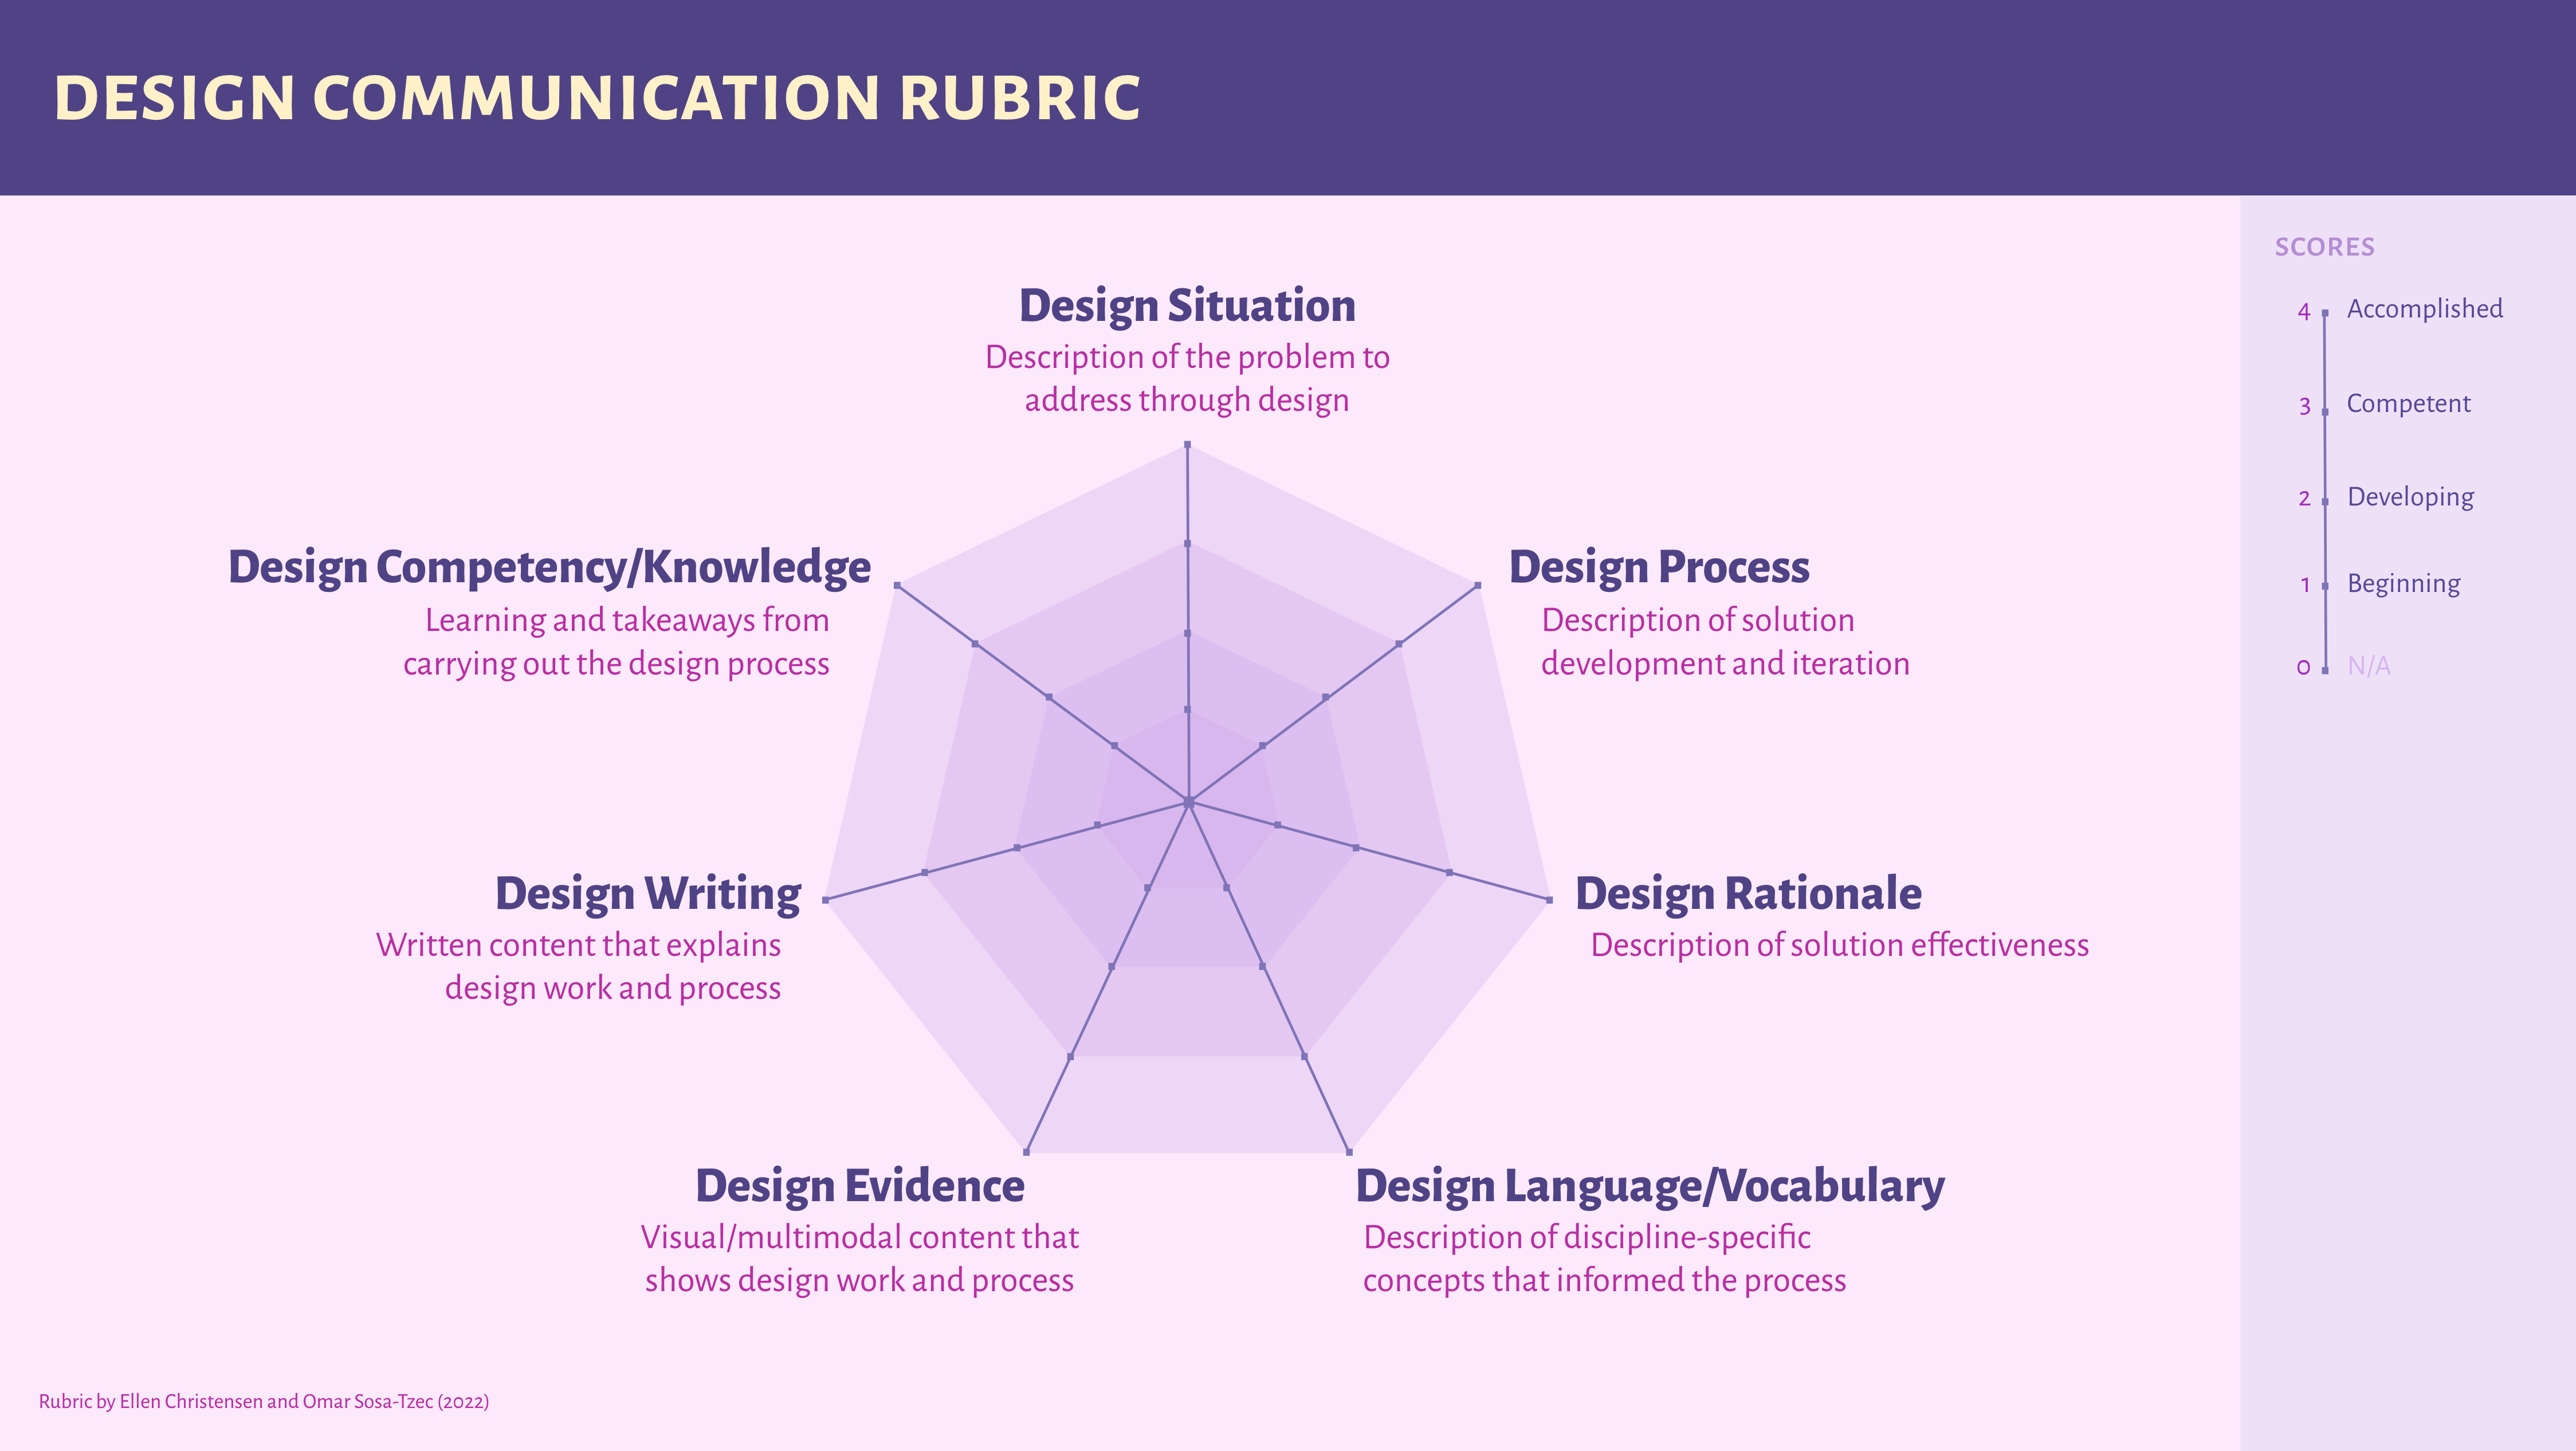 Rubric to evaluate design communication in the classroom by Ellen Christensen and Omar Sosa-Tzec